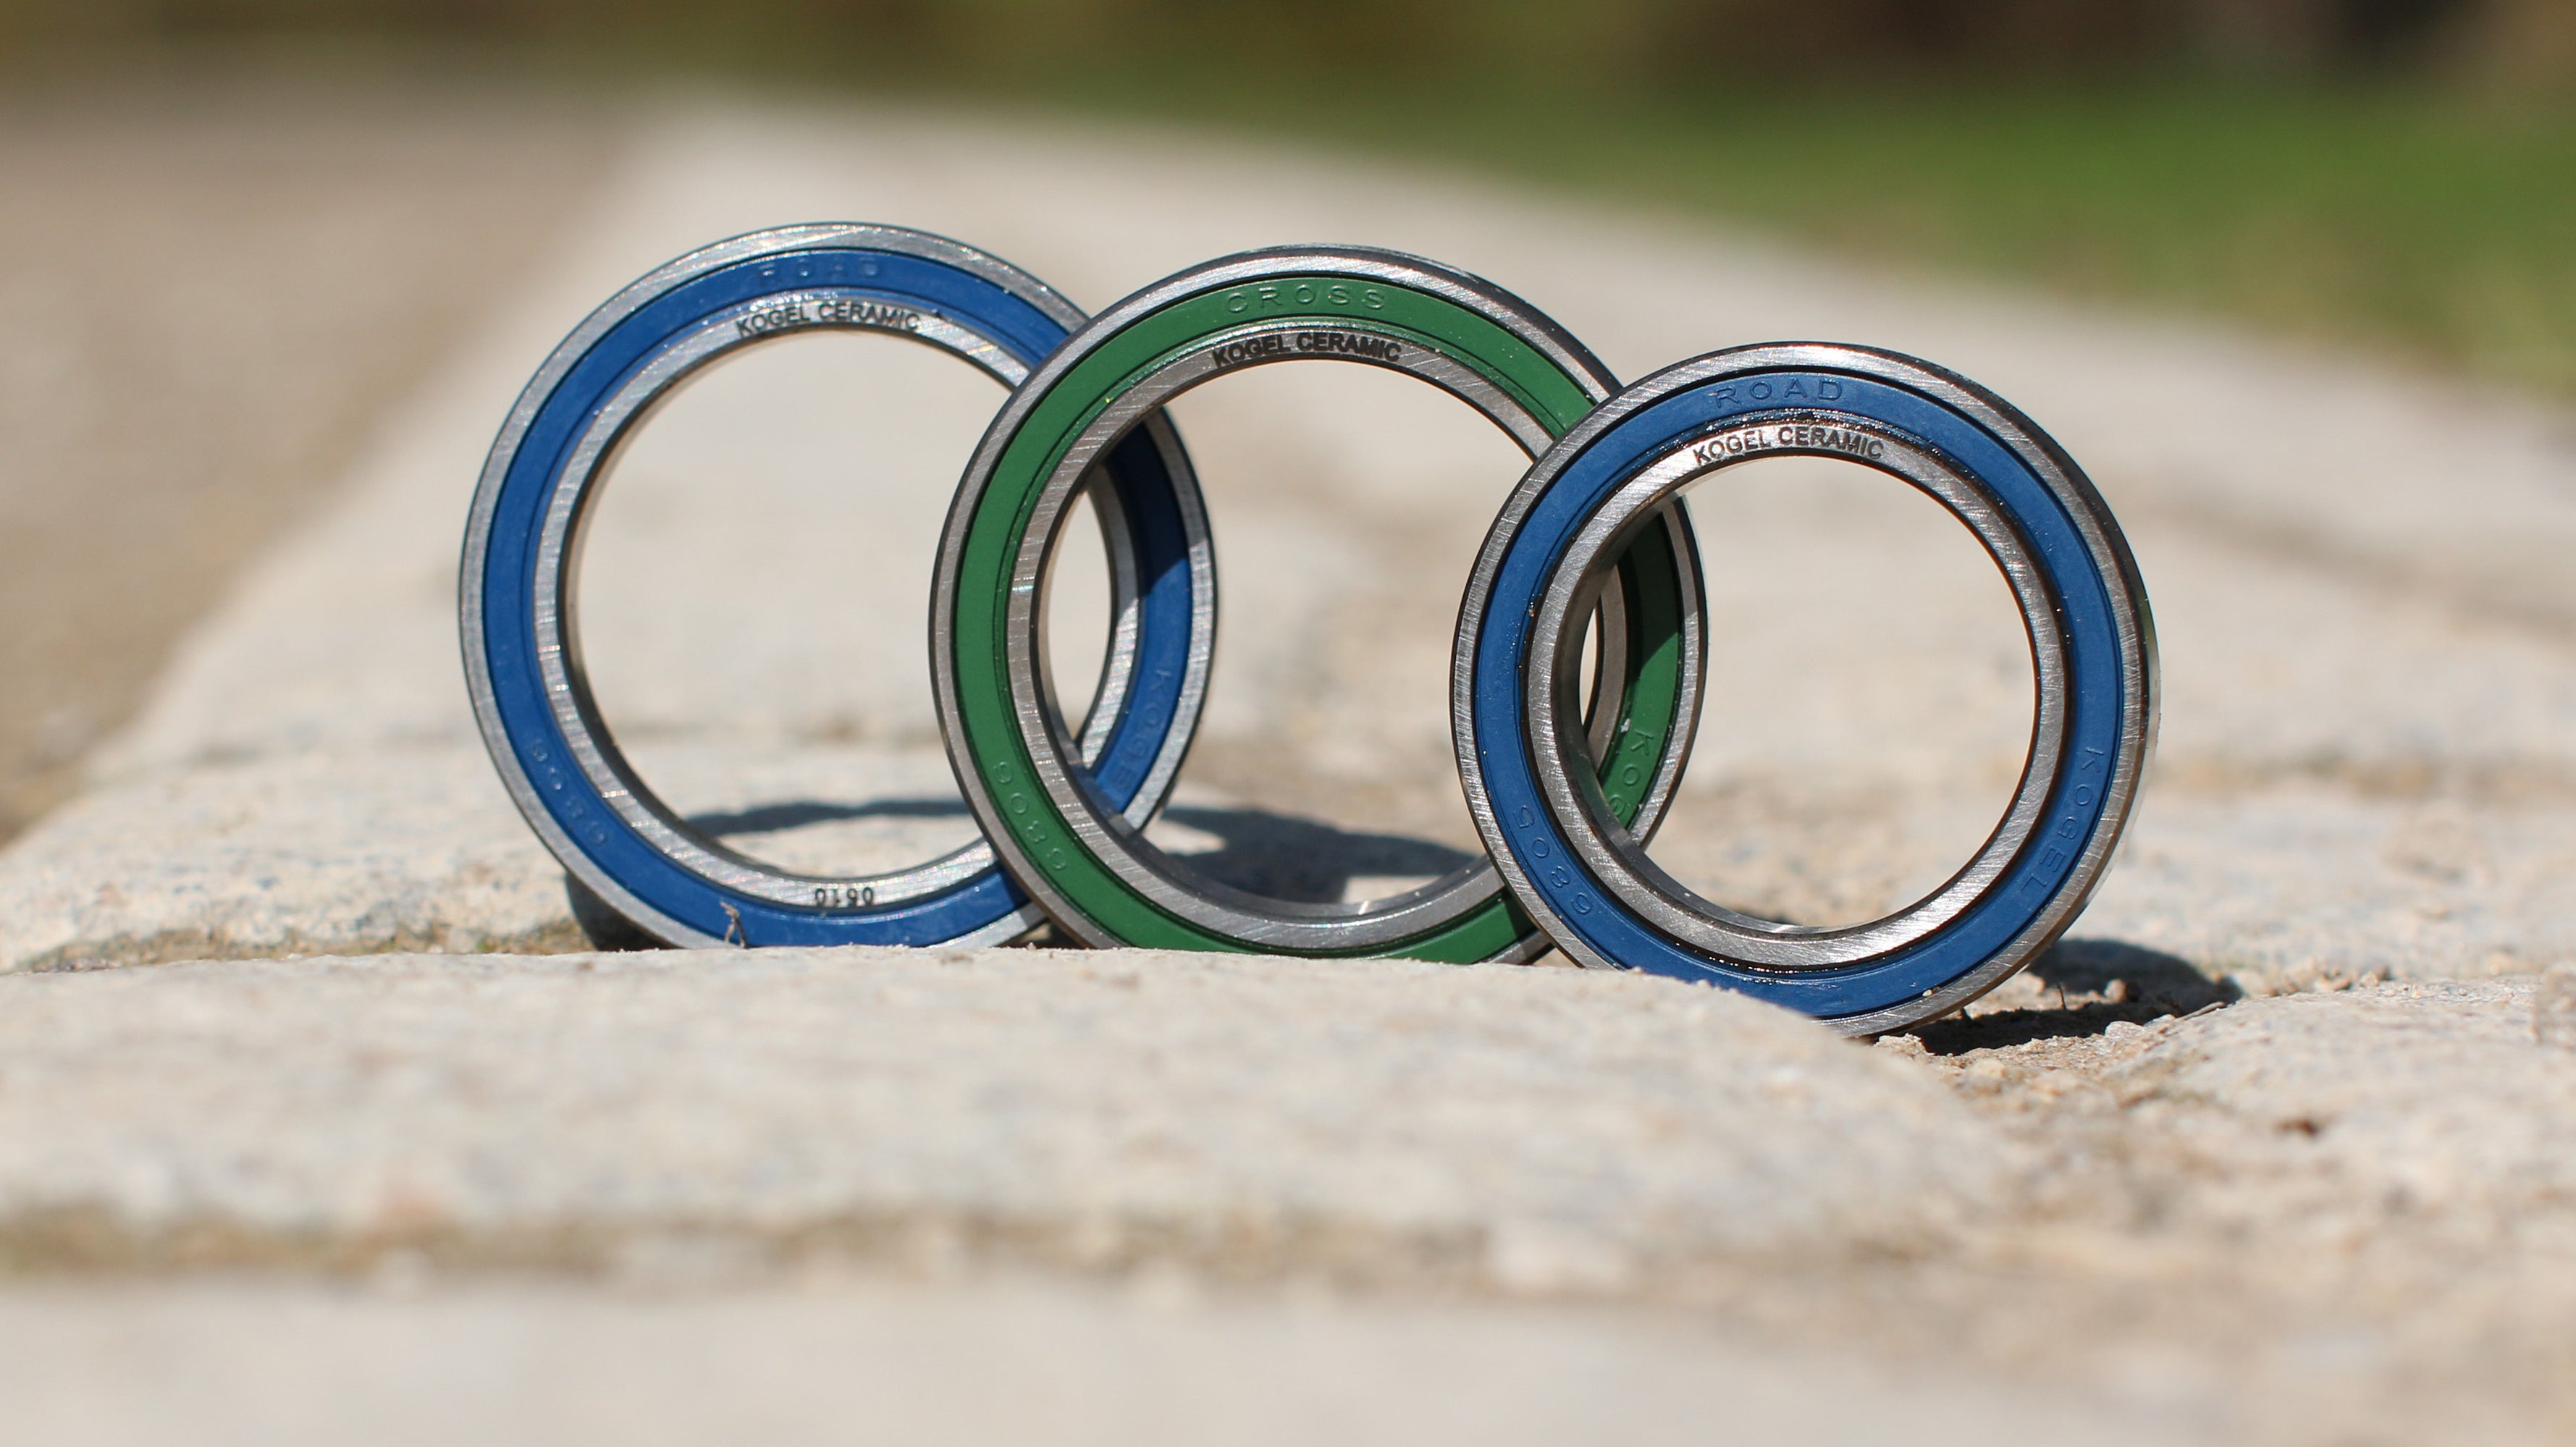 The lowest friction from ceramic bearings